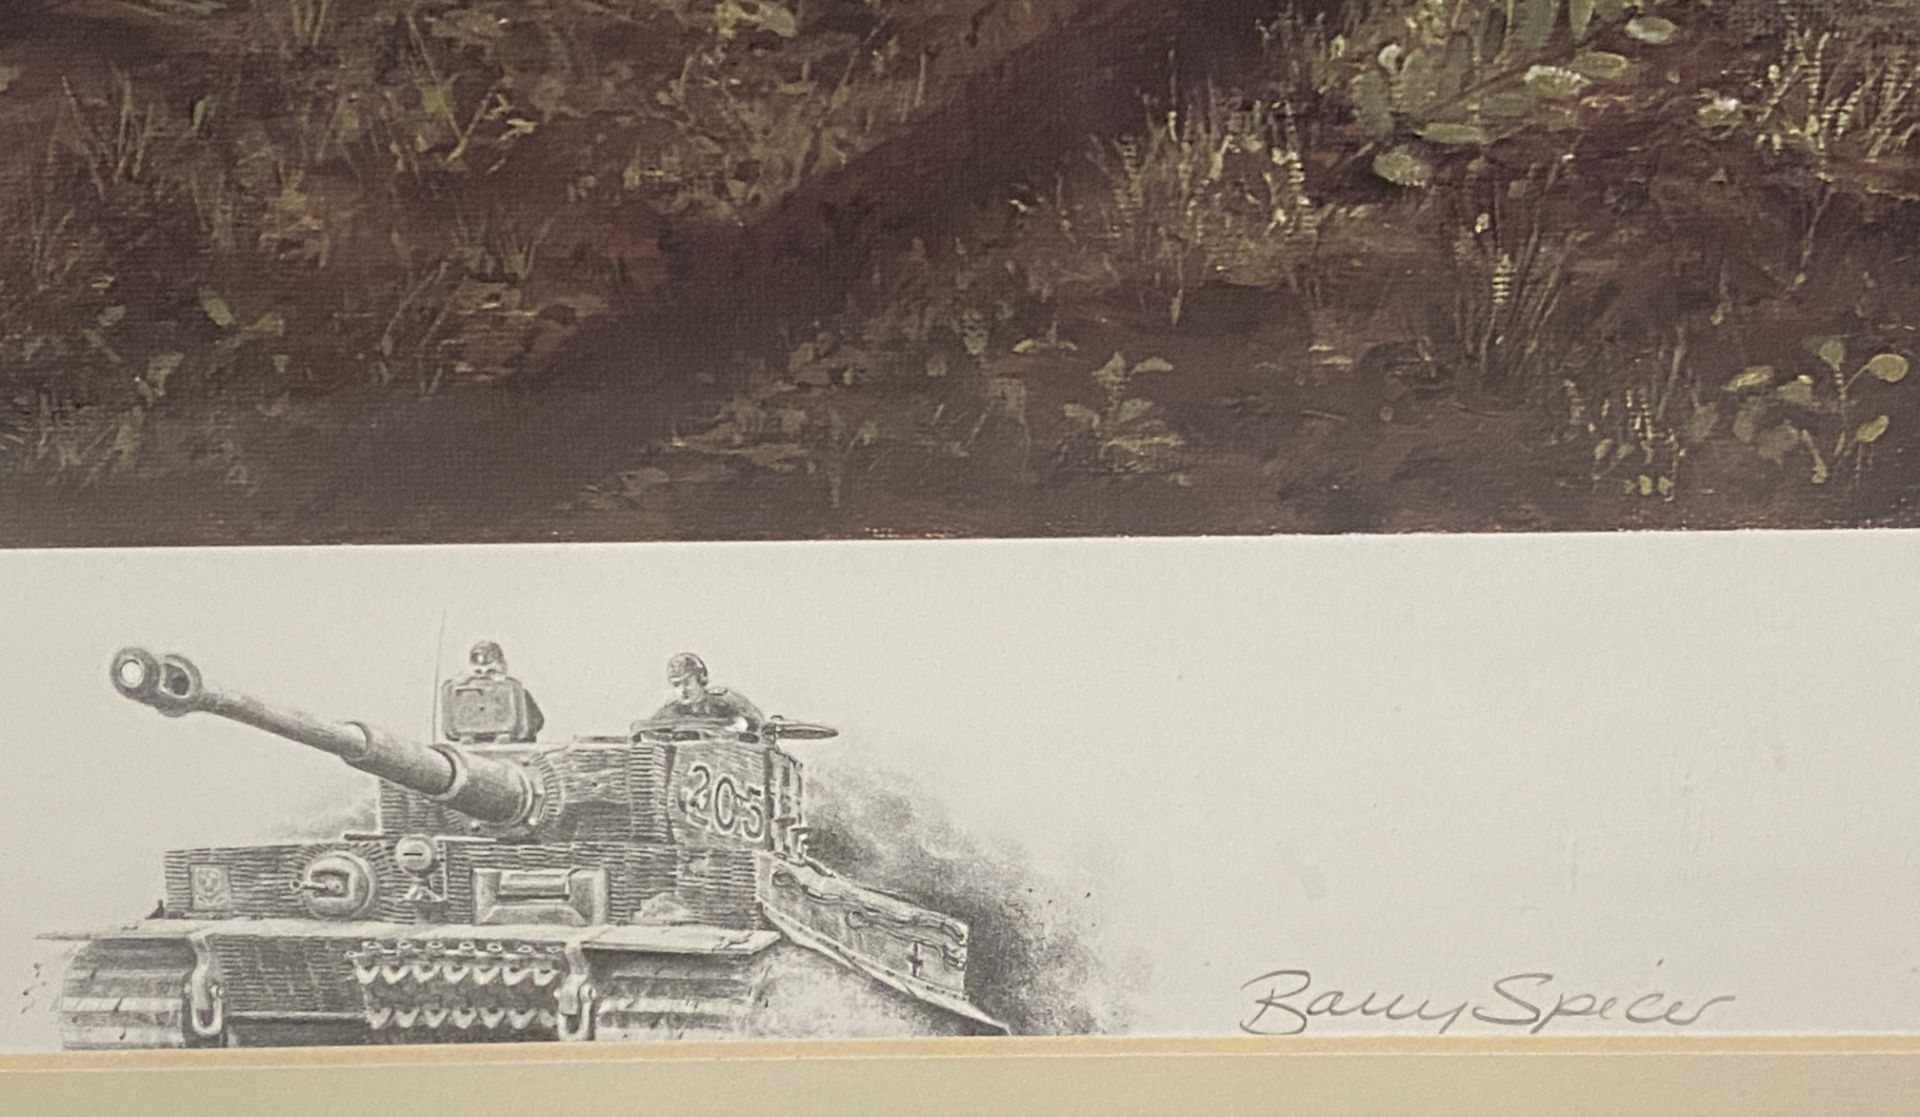 Barry Spicer 'Wittman's Tiger 1 in Villers Bocage' framed Limited Edition print 475/650 signed in - Image 4 of 8